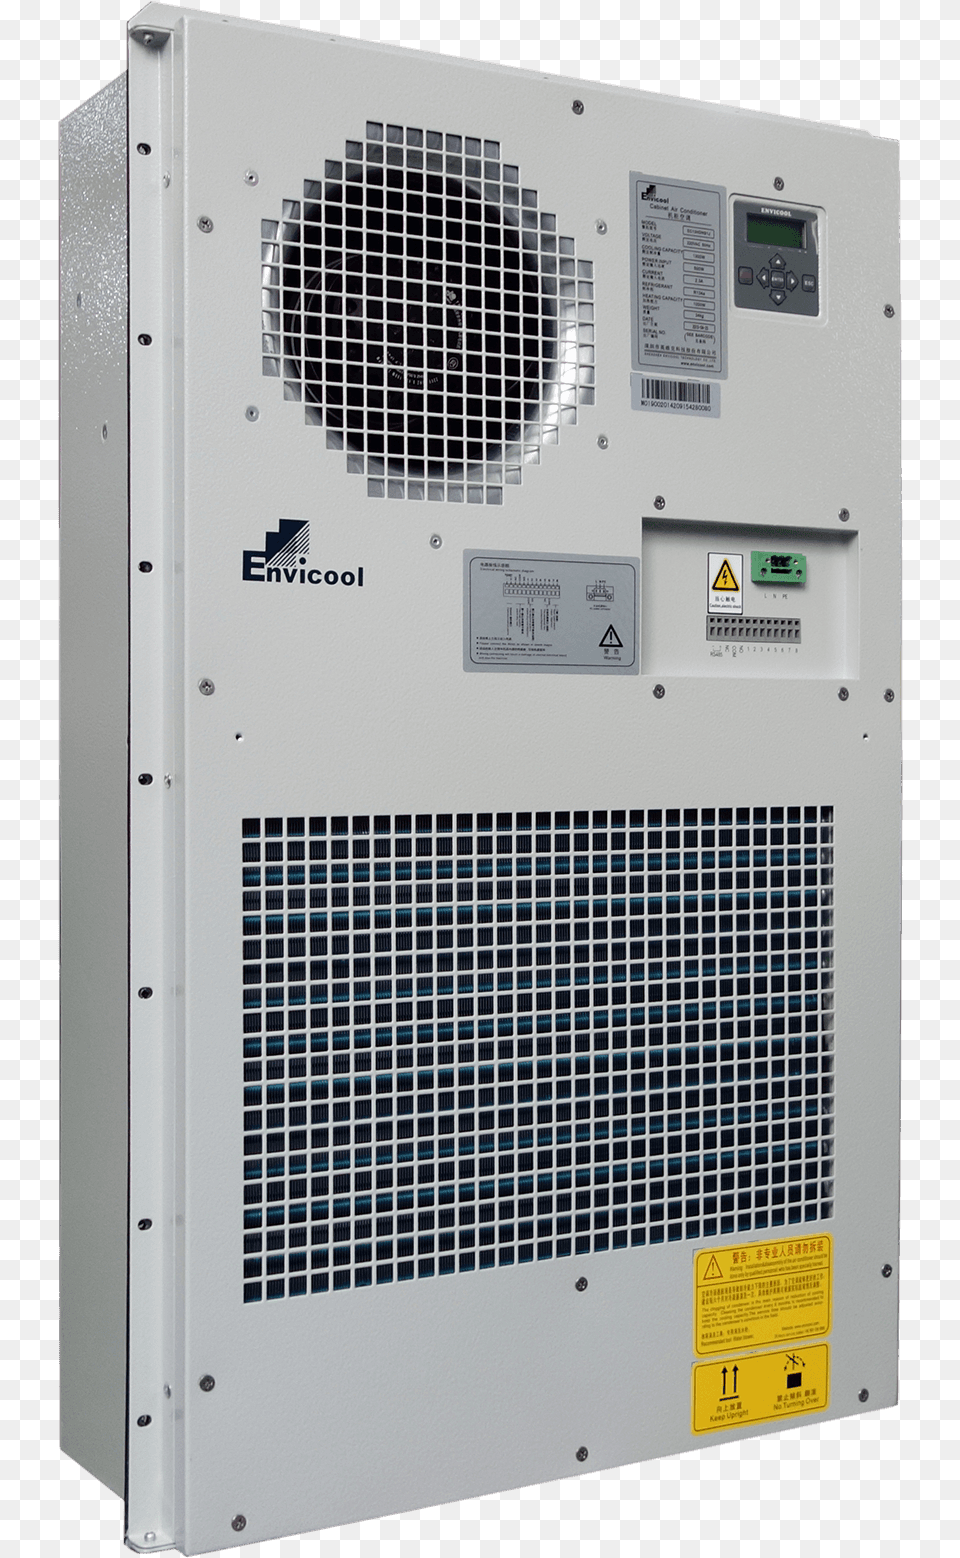 Wholesale Price Server Room Cooling Unit Computer Hardware, Device, Appliance, Electrical Device Png Image